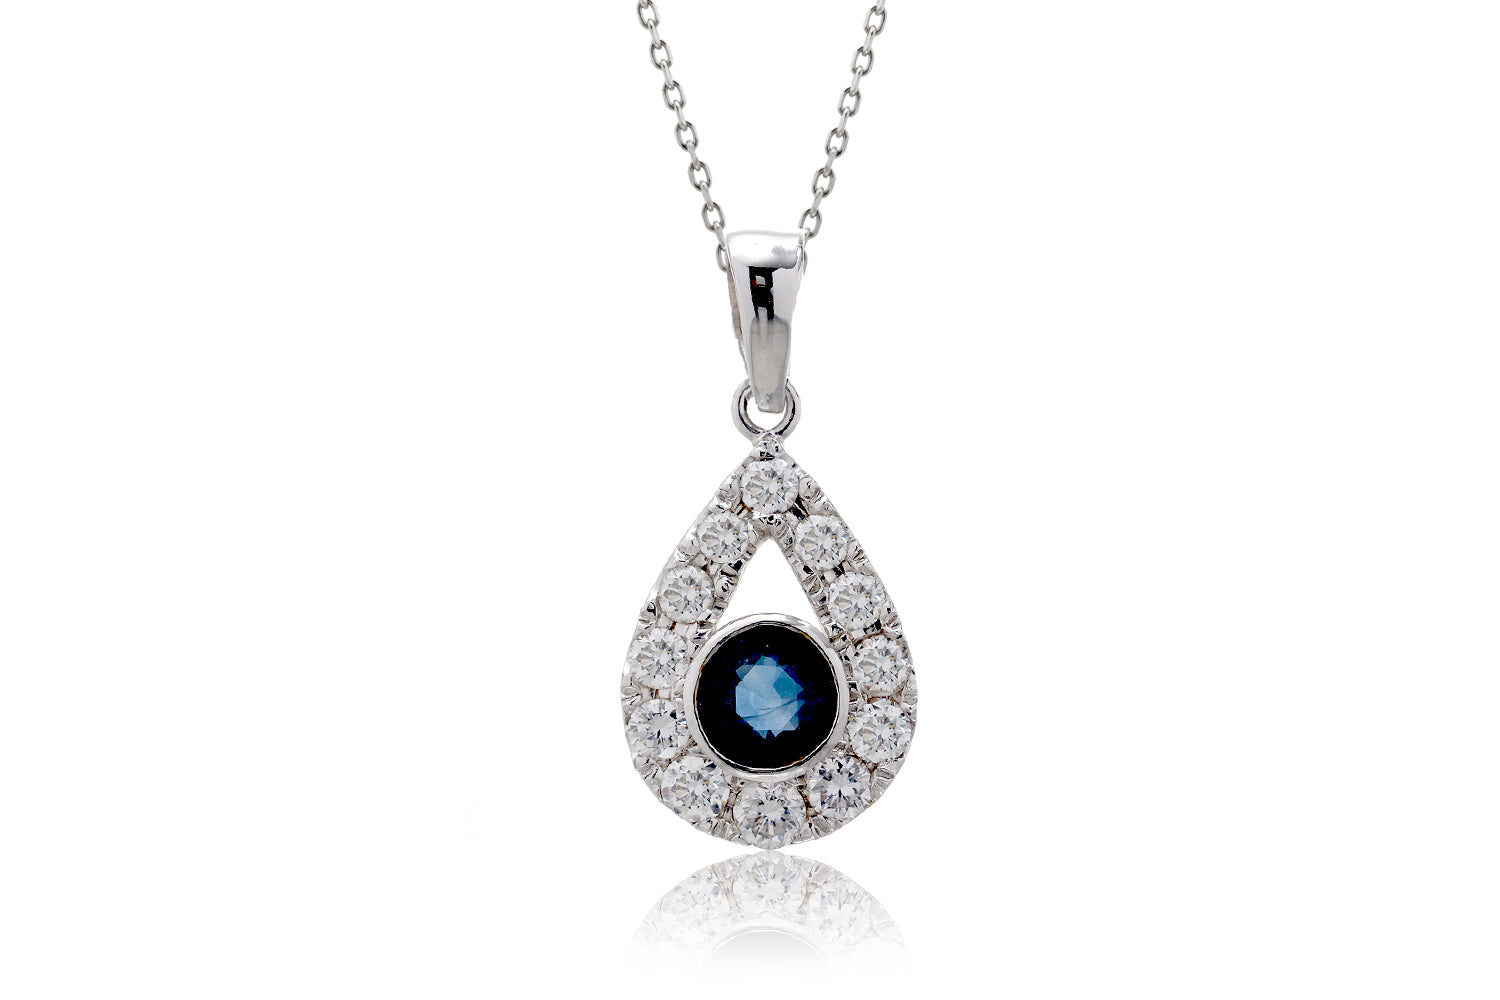 The Round Sapphire With Teardrop Halo Pendant